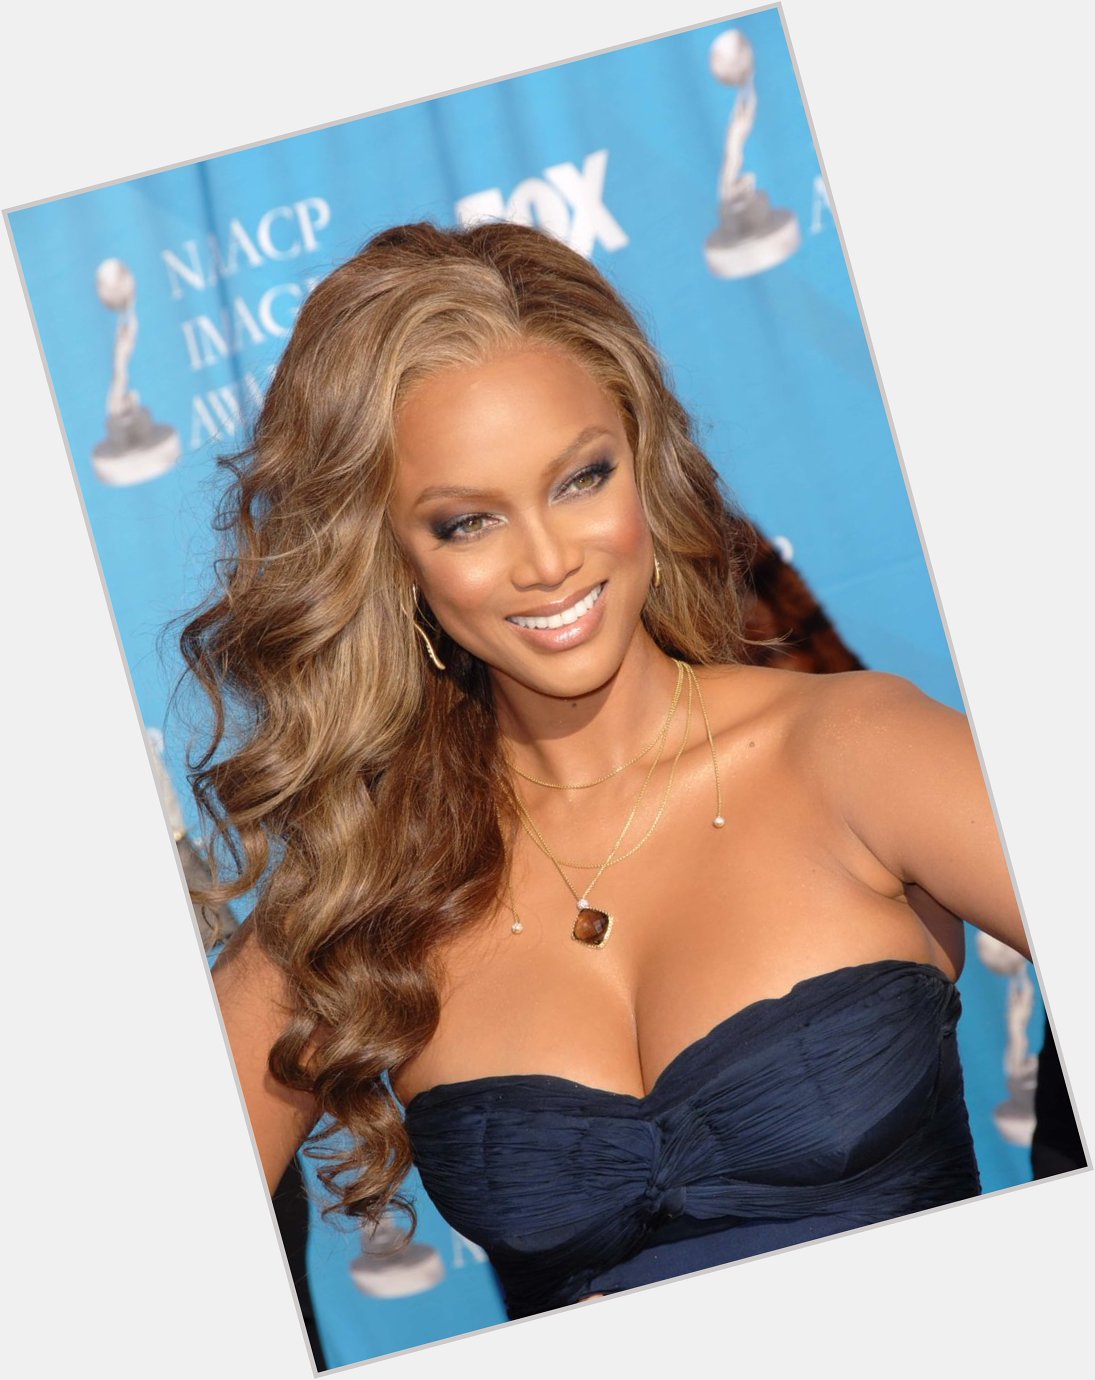 Happy Birthday to the lovely Supermodel Tyra Banks!! 